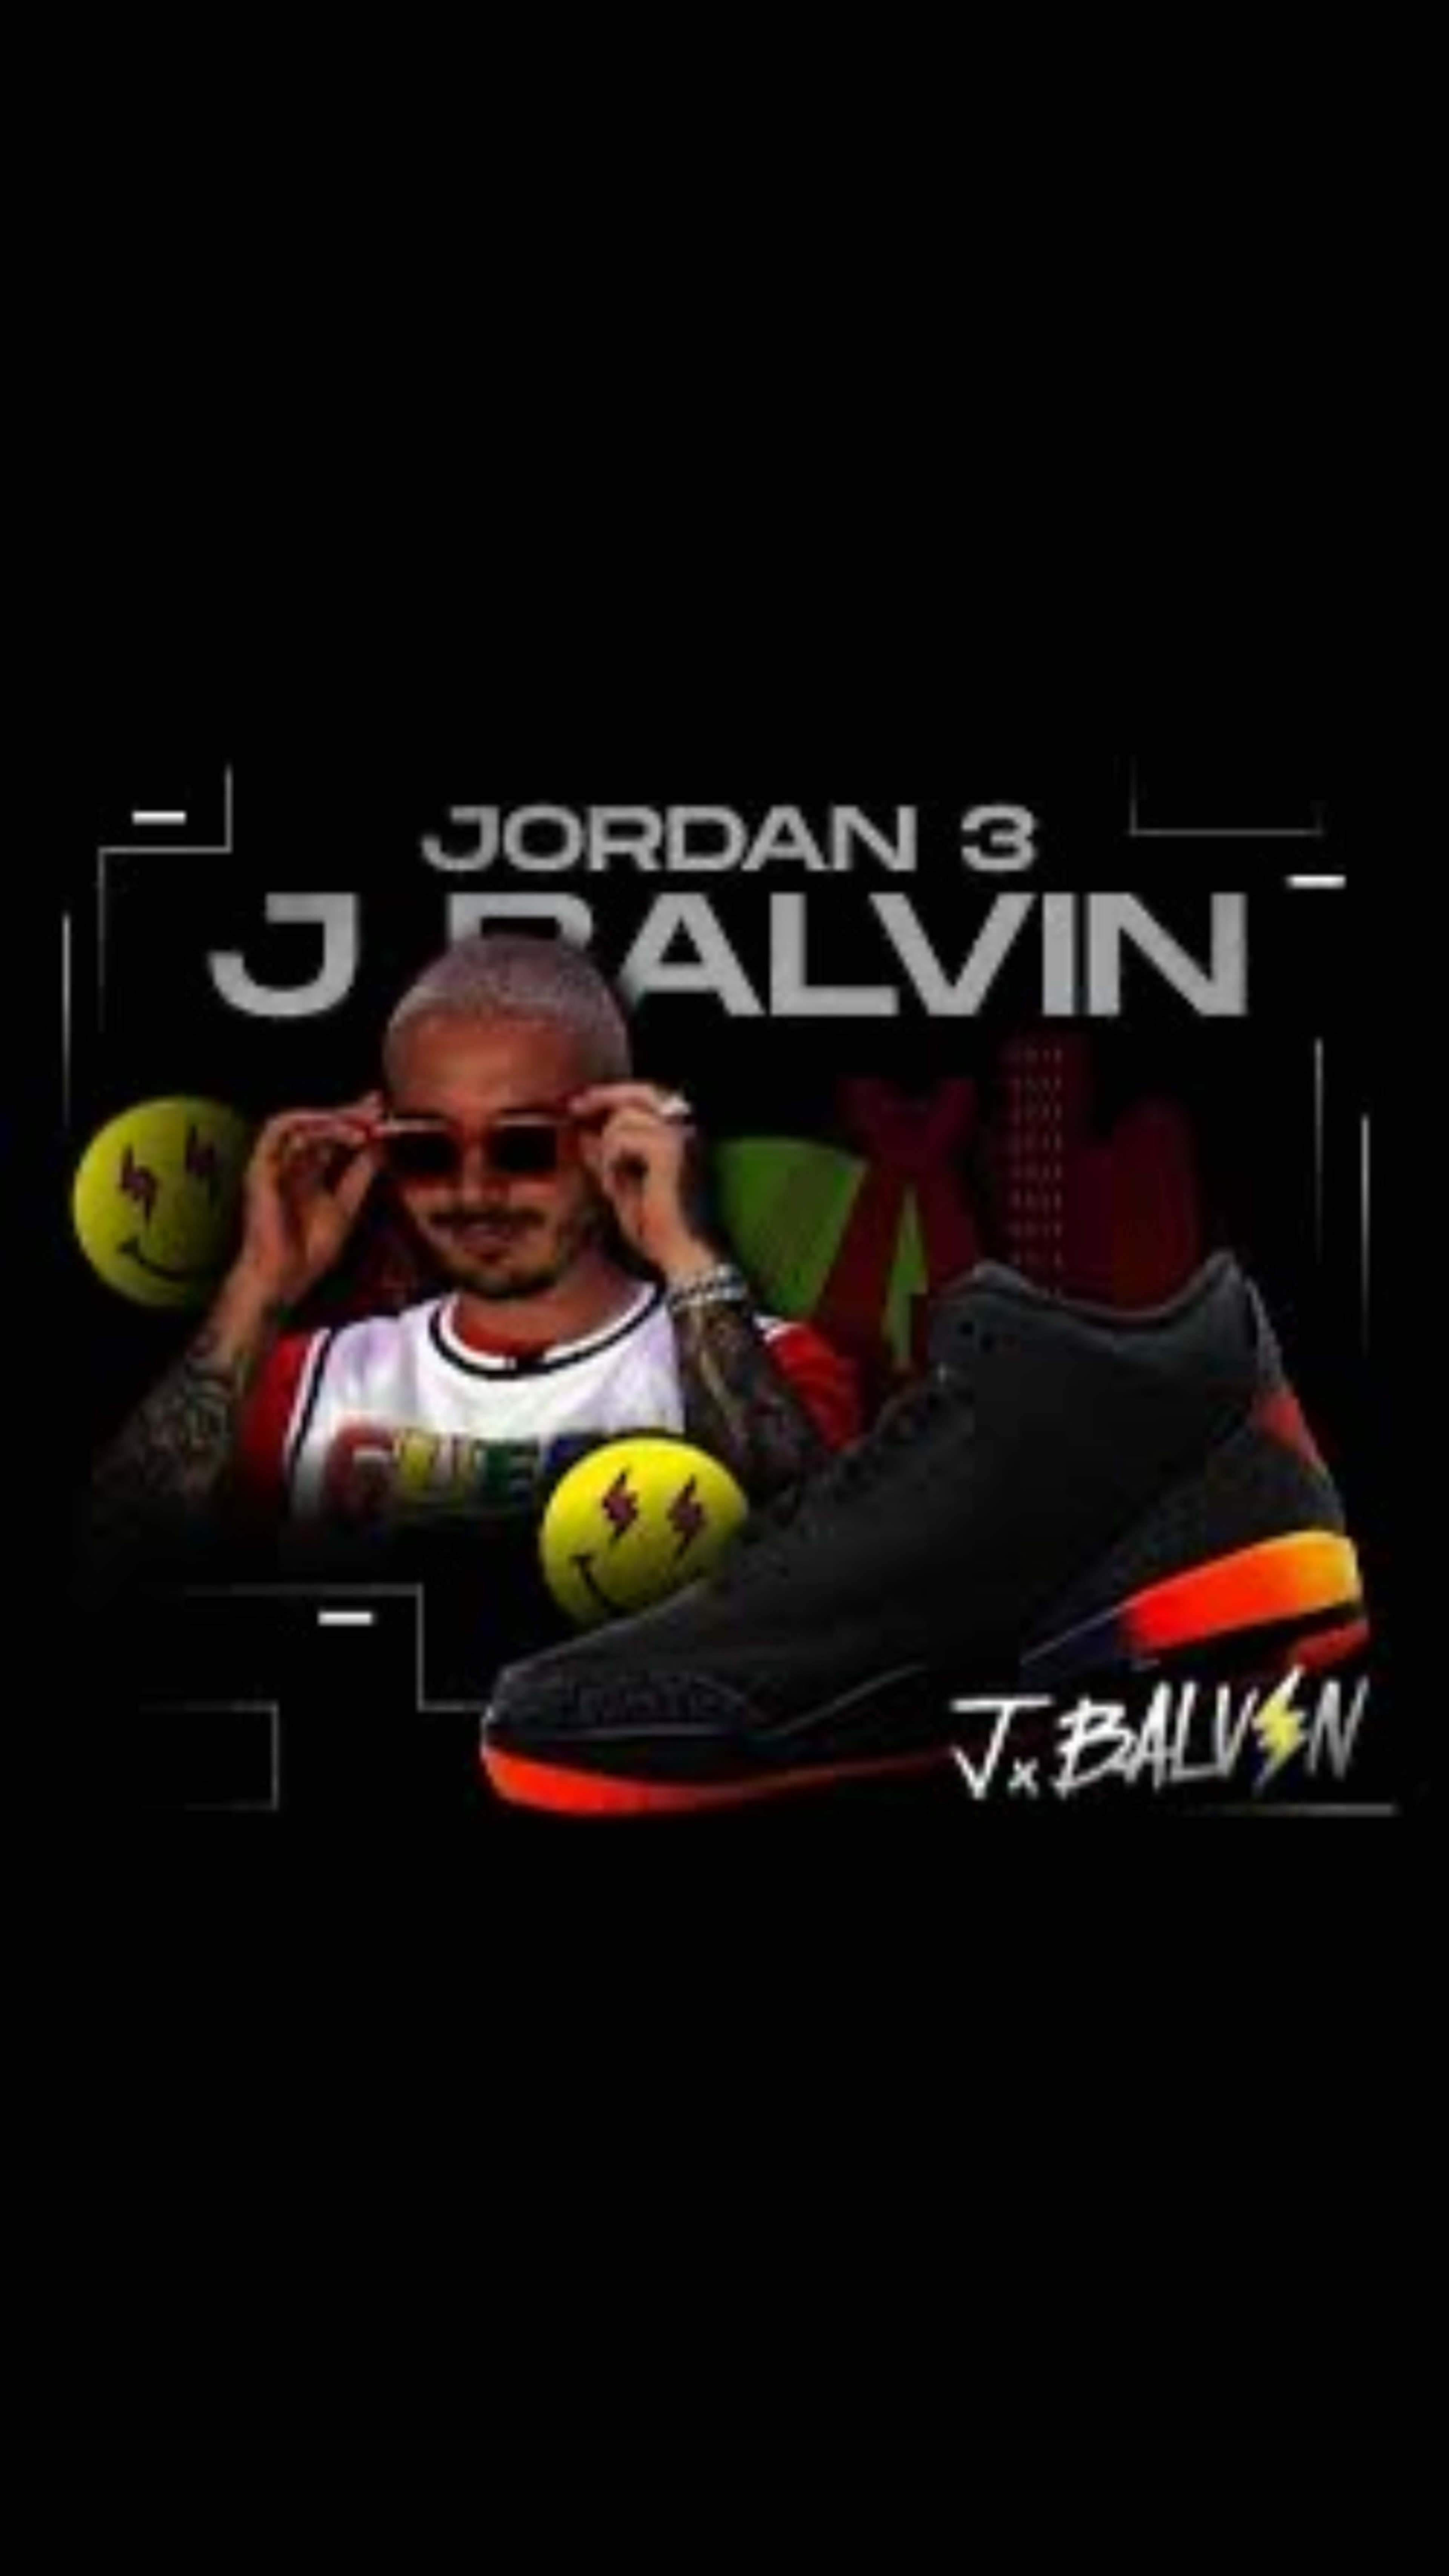 Preview image for the show titled " MYSTERY WHEEL- ANY SIZE JORDAN 3  J BALVIN RIO & INSTA HITS!" at Tomorrow @ 12:10 AM